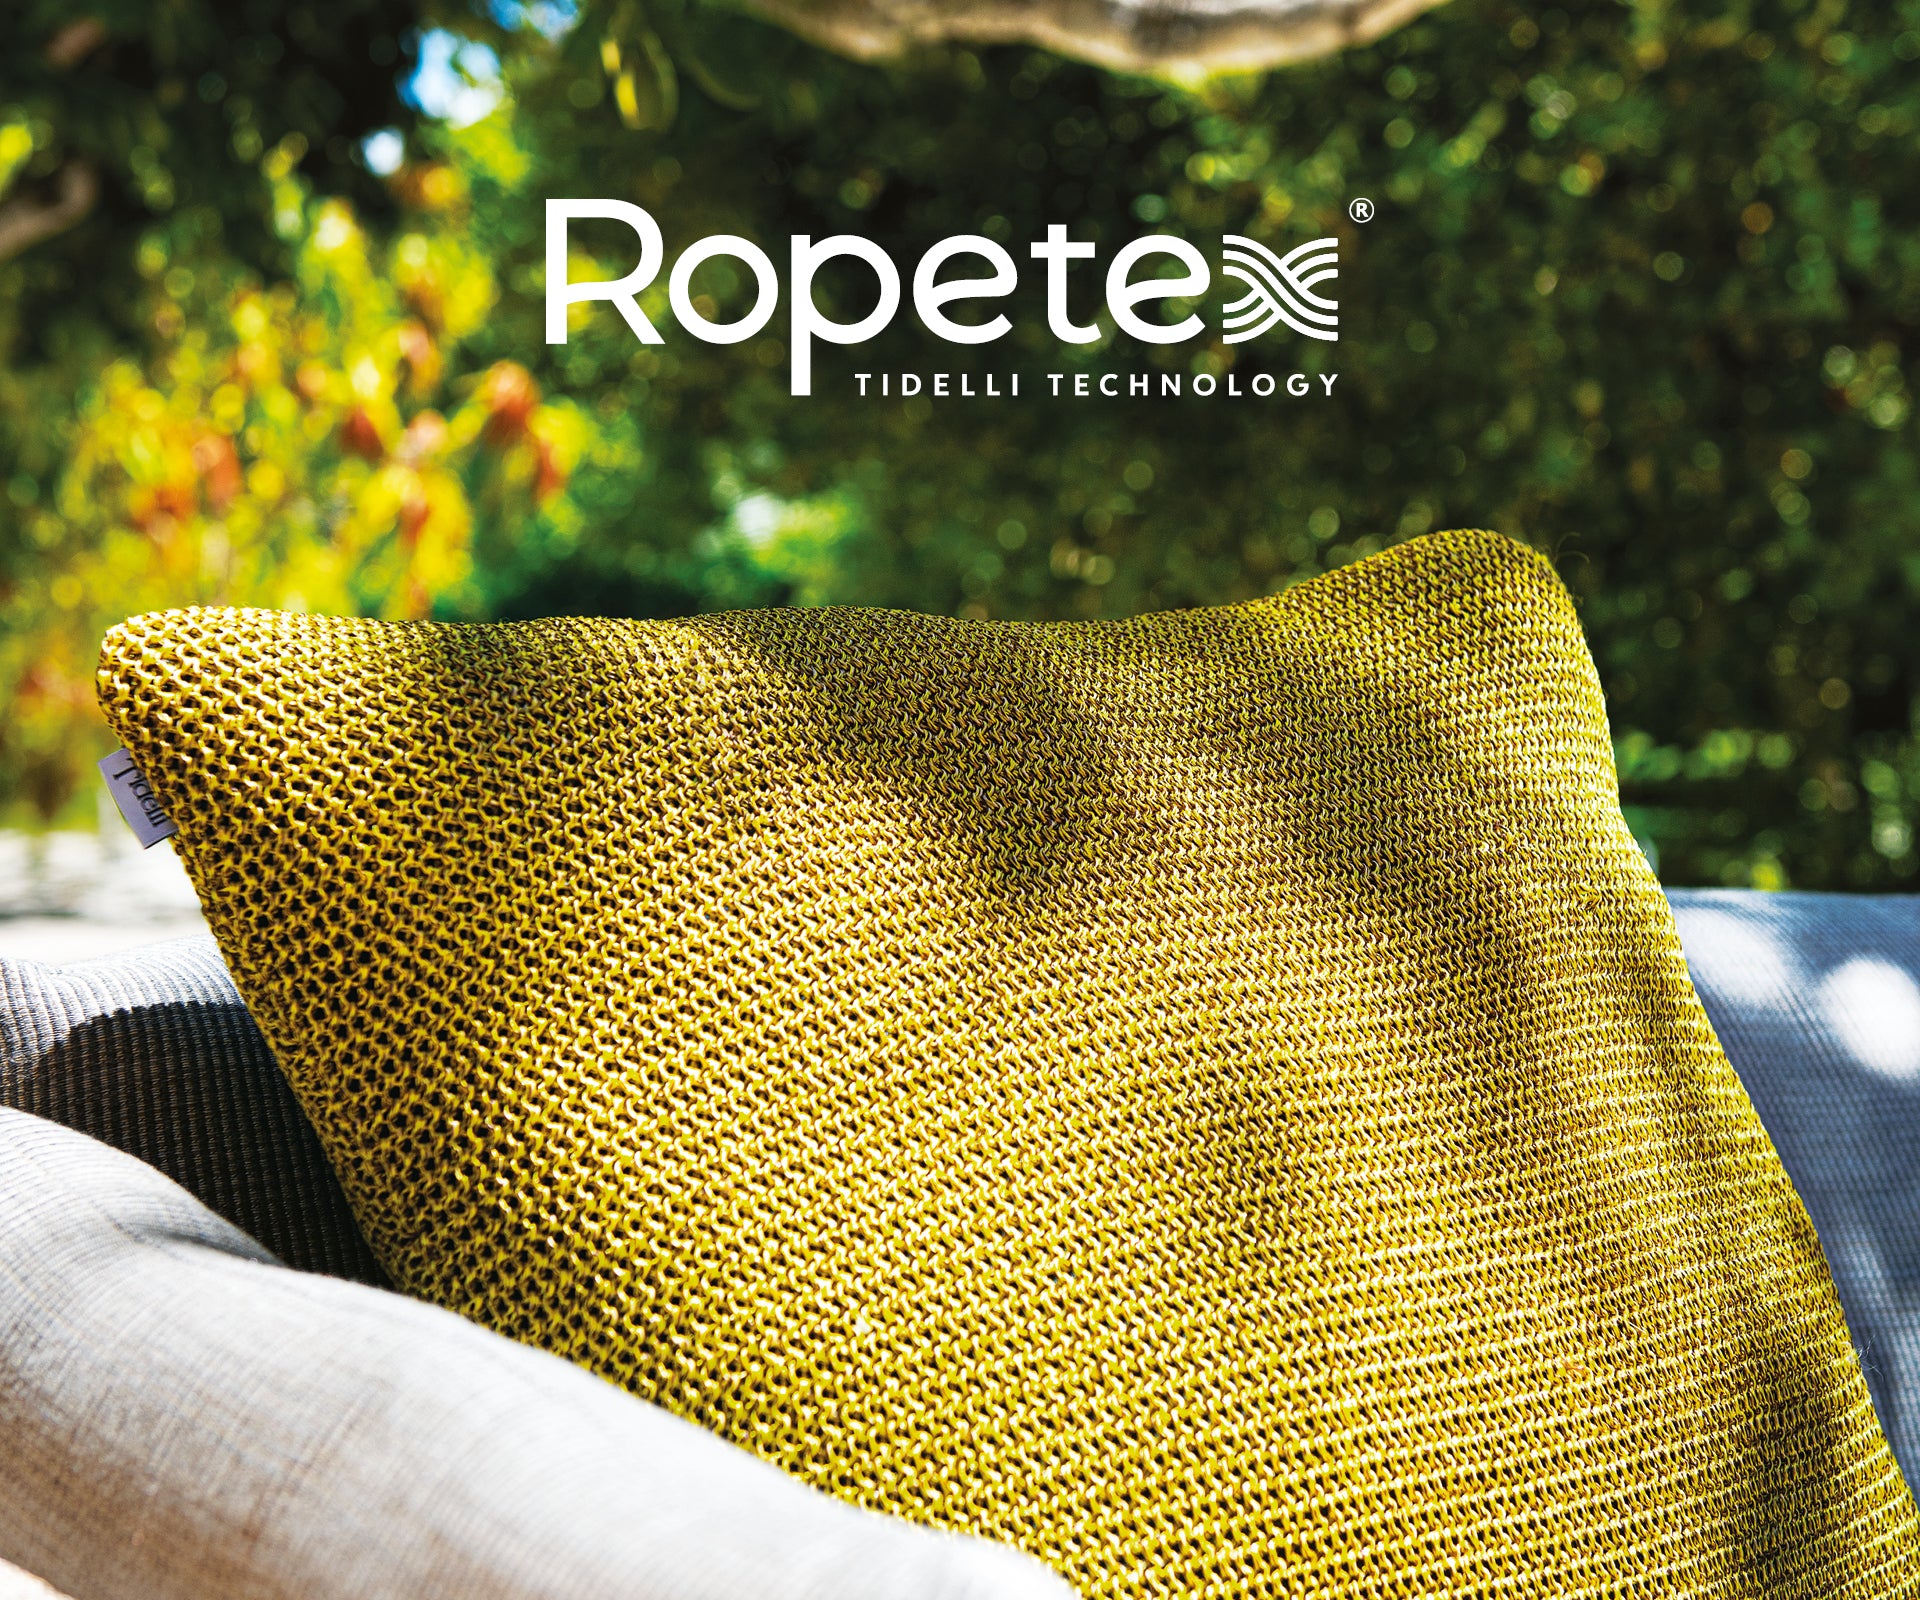 Ropetex - Tidelli's Exclusive Technology